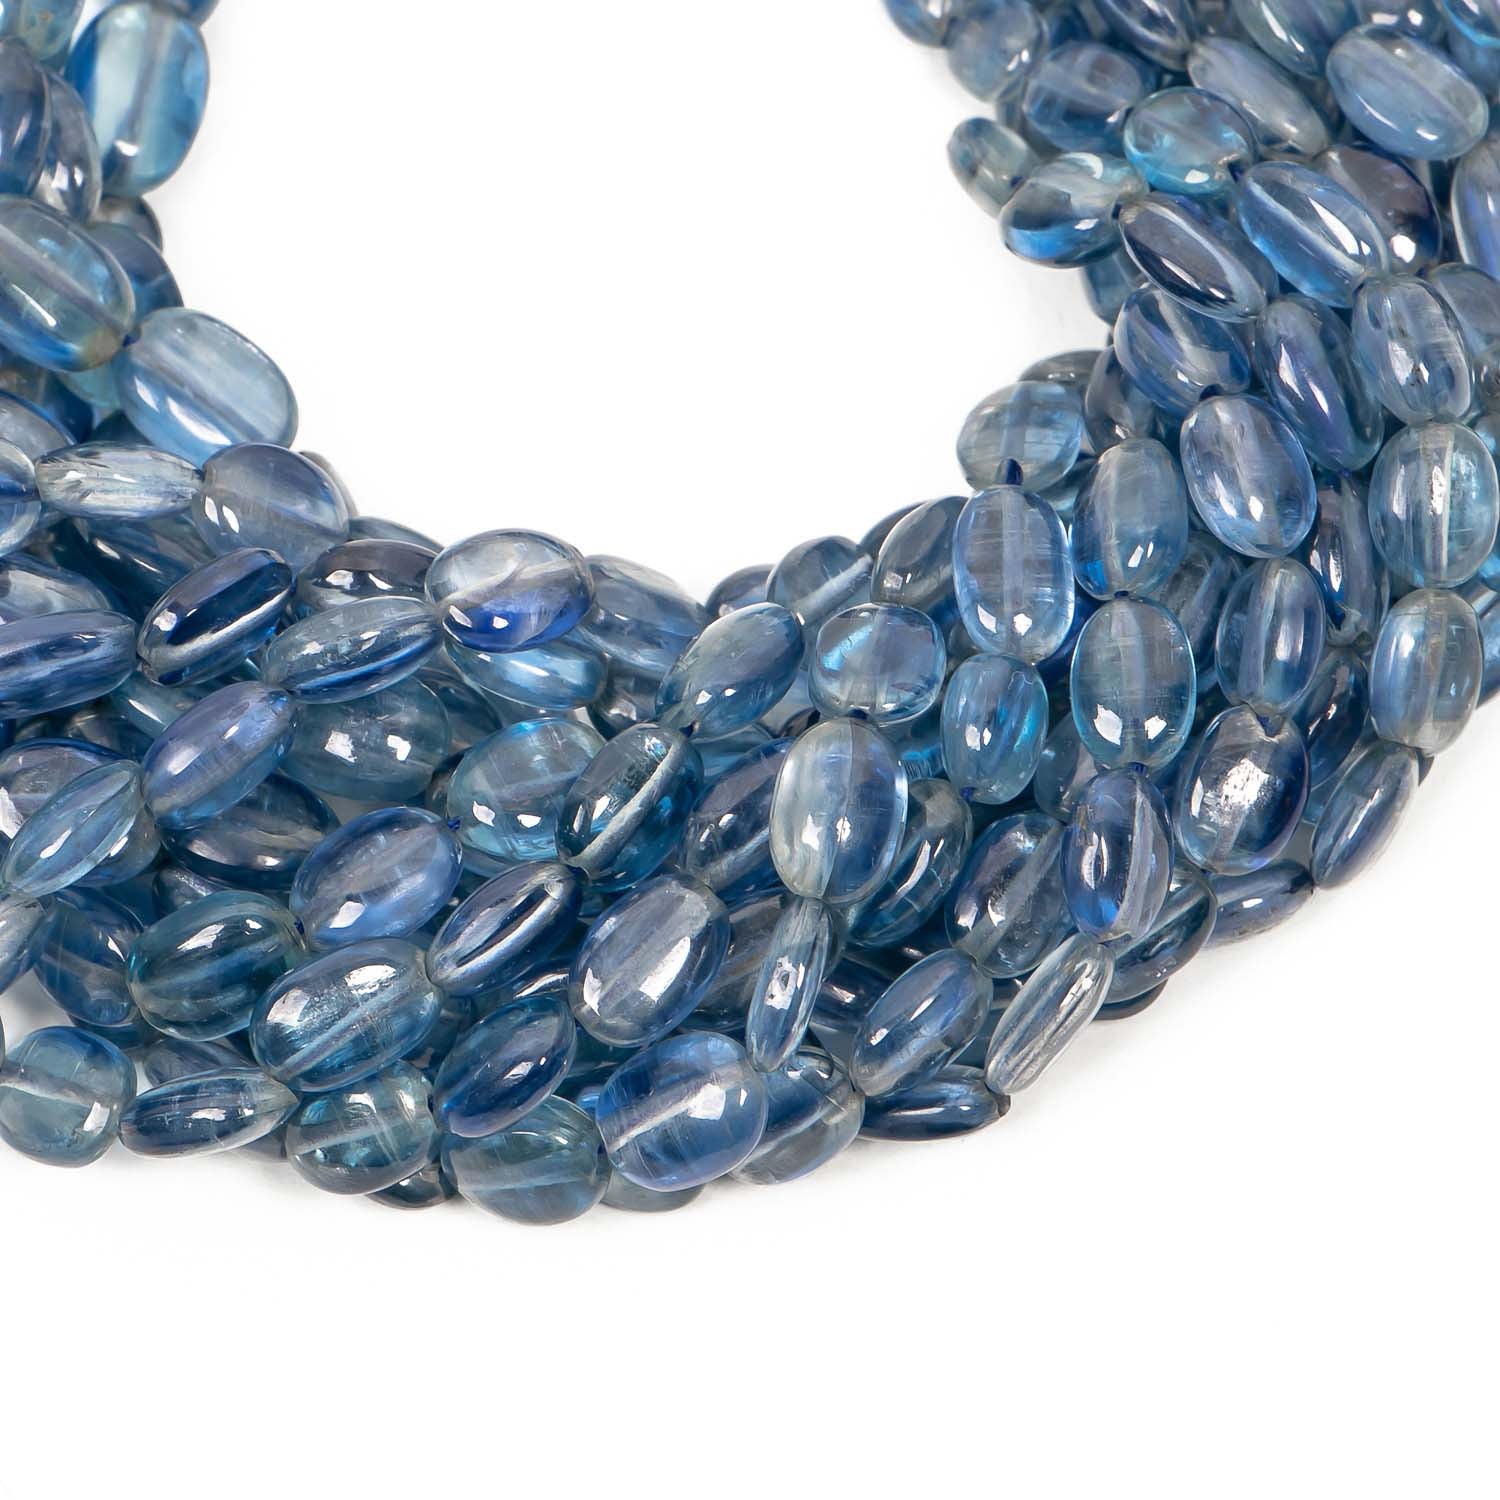 Natural Kyanite Smooth Oval Briolette, Wholesale Gemstone Beads, Loose Craft Beads